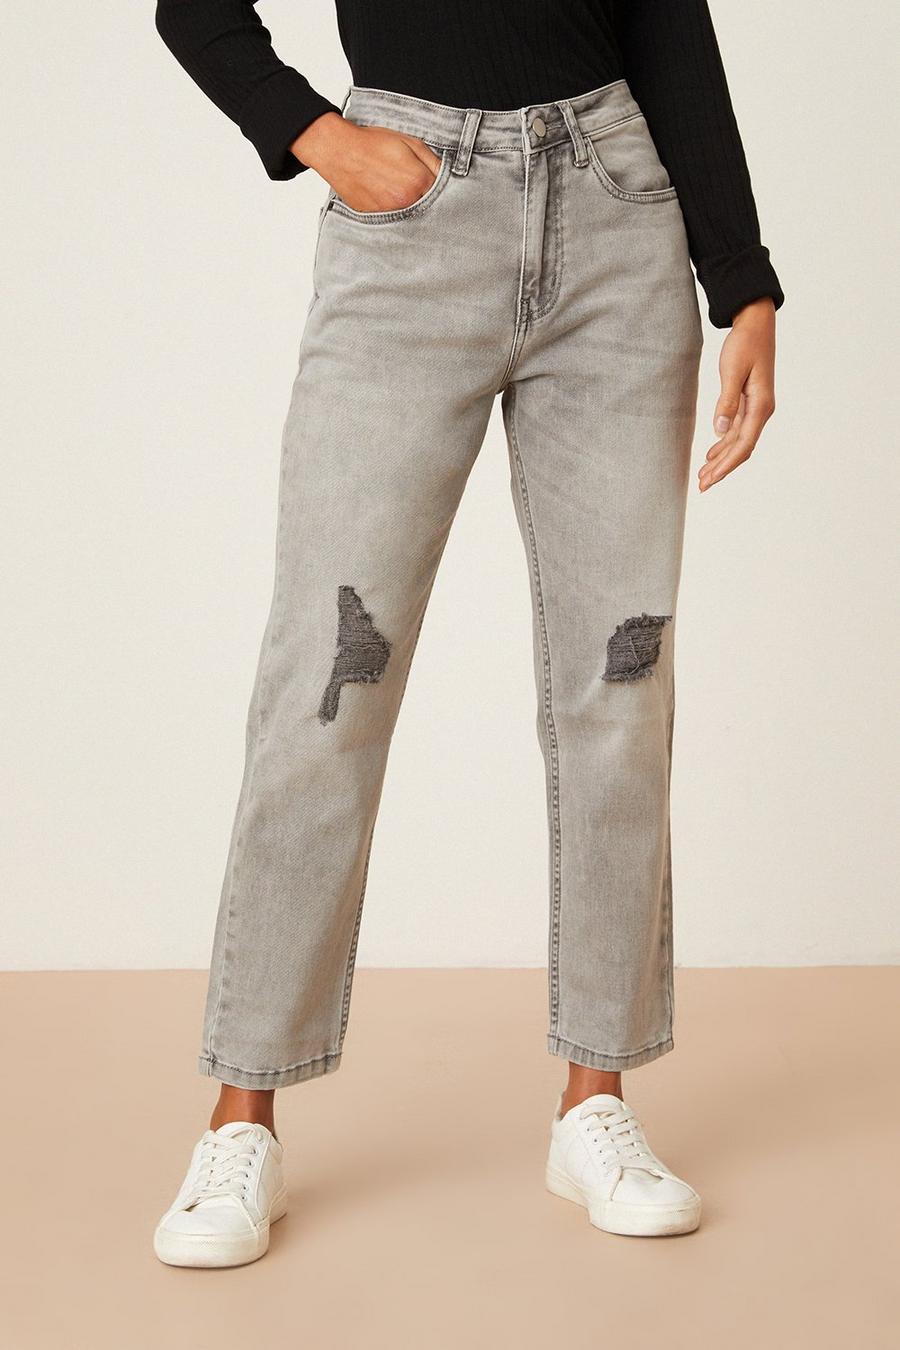 Petite Grey Ripped Mom Jeans